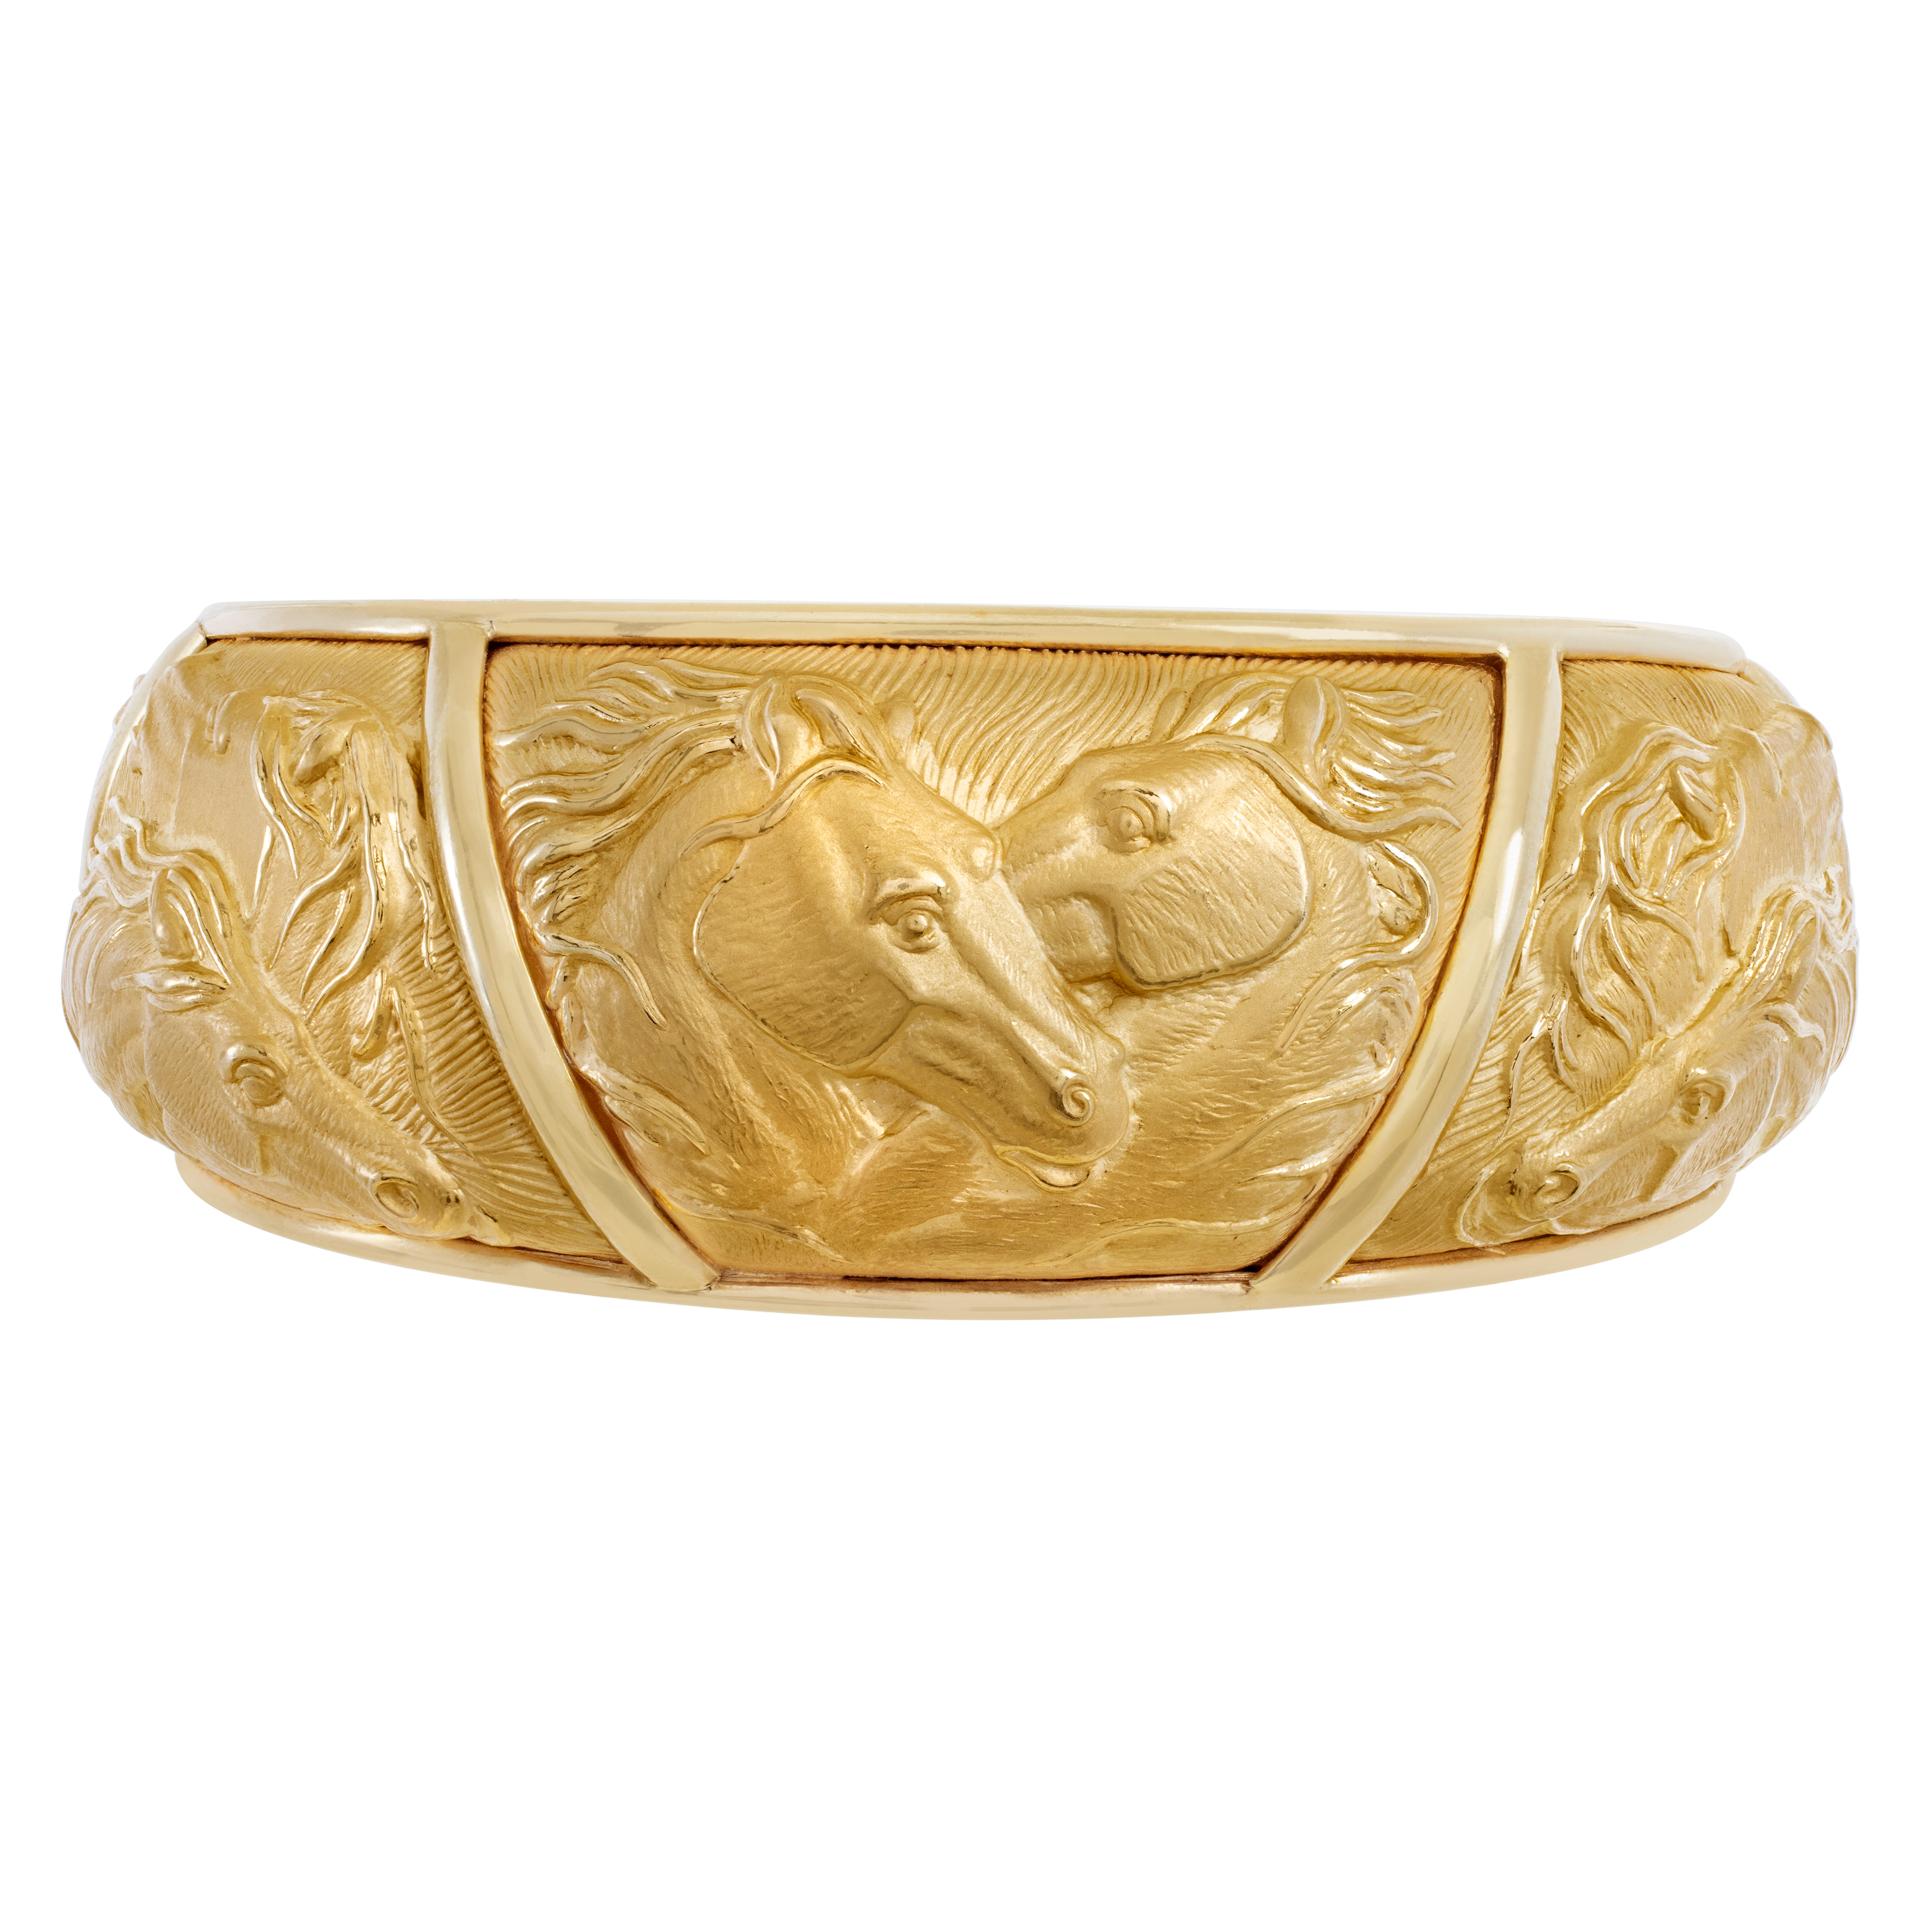 Spanish designer Carrera y Carrera, from the Mosaico collection, cuff- bangle with horse heads in 18k. Crafted using the repousse technique featuring horses in a sandblasted finish accented with high polished sections.FIts up to 7.50 wrist.